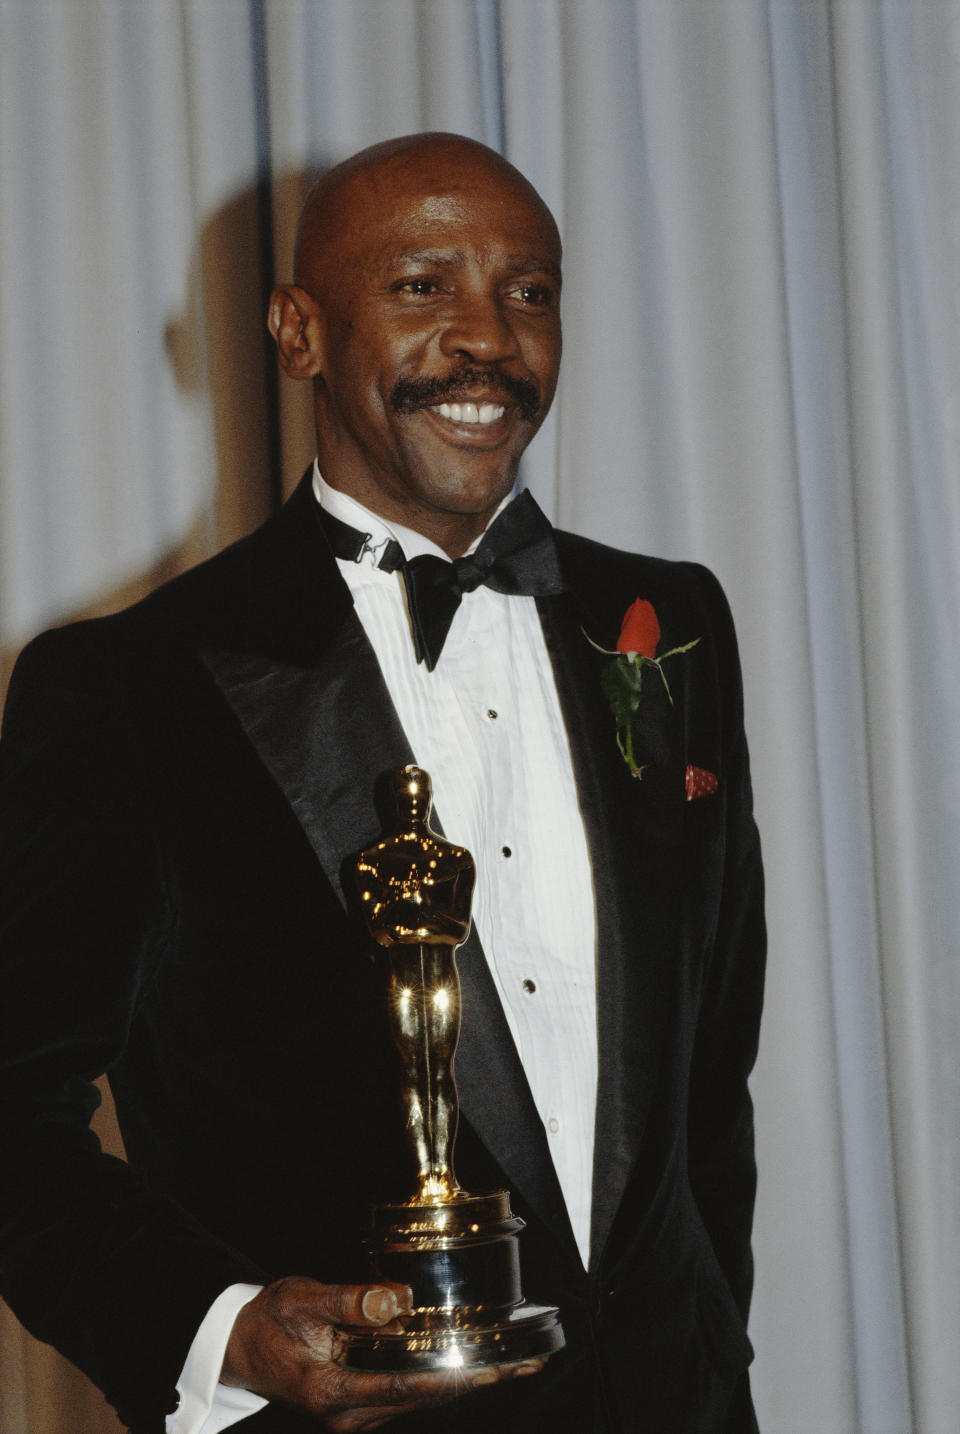 American Emmy, Golden Globe, and Academy Award winning actor Louis Cameron Gossett, Jr wins the Oscar for Best Actor in a Supporting Role for An Officer and a Gentleman during the 55th Academy Awards. (Photo by Bill Nation/Sygma via Getty Images)